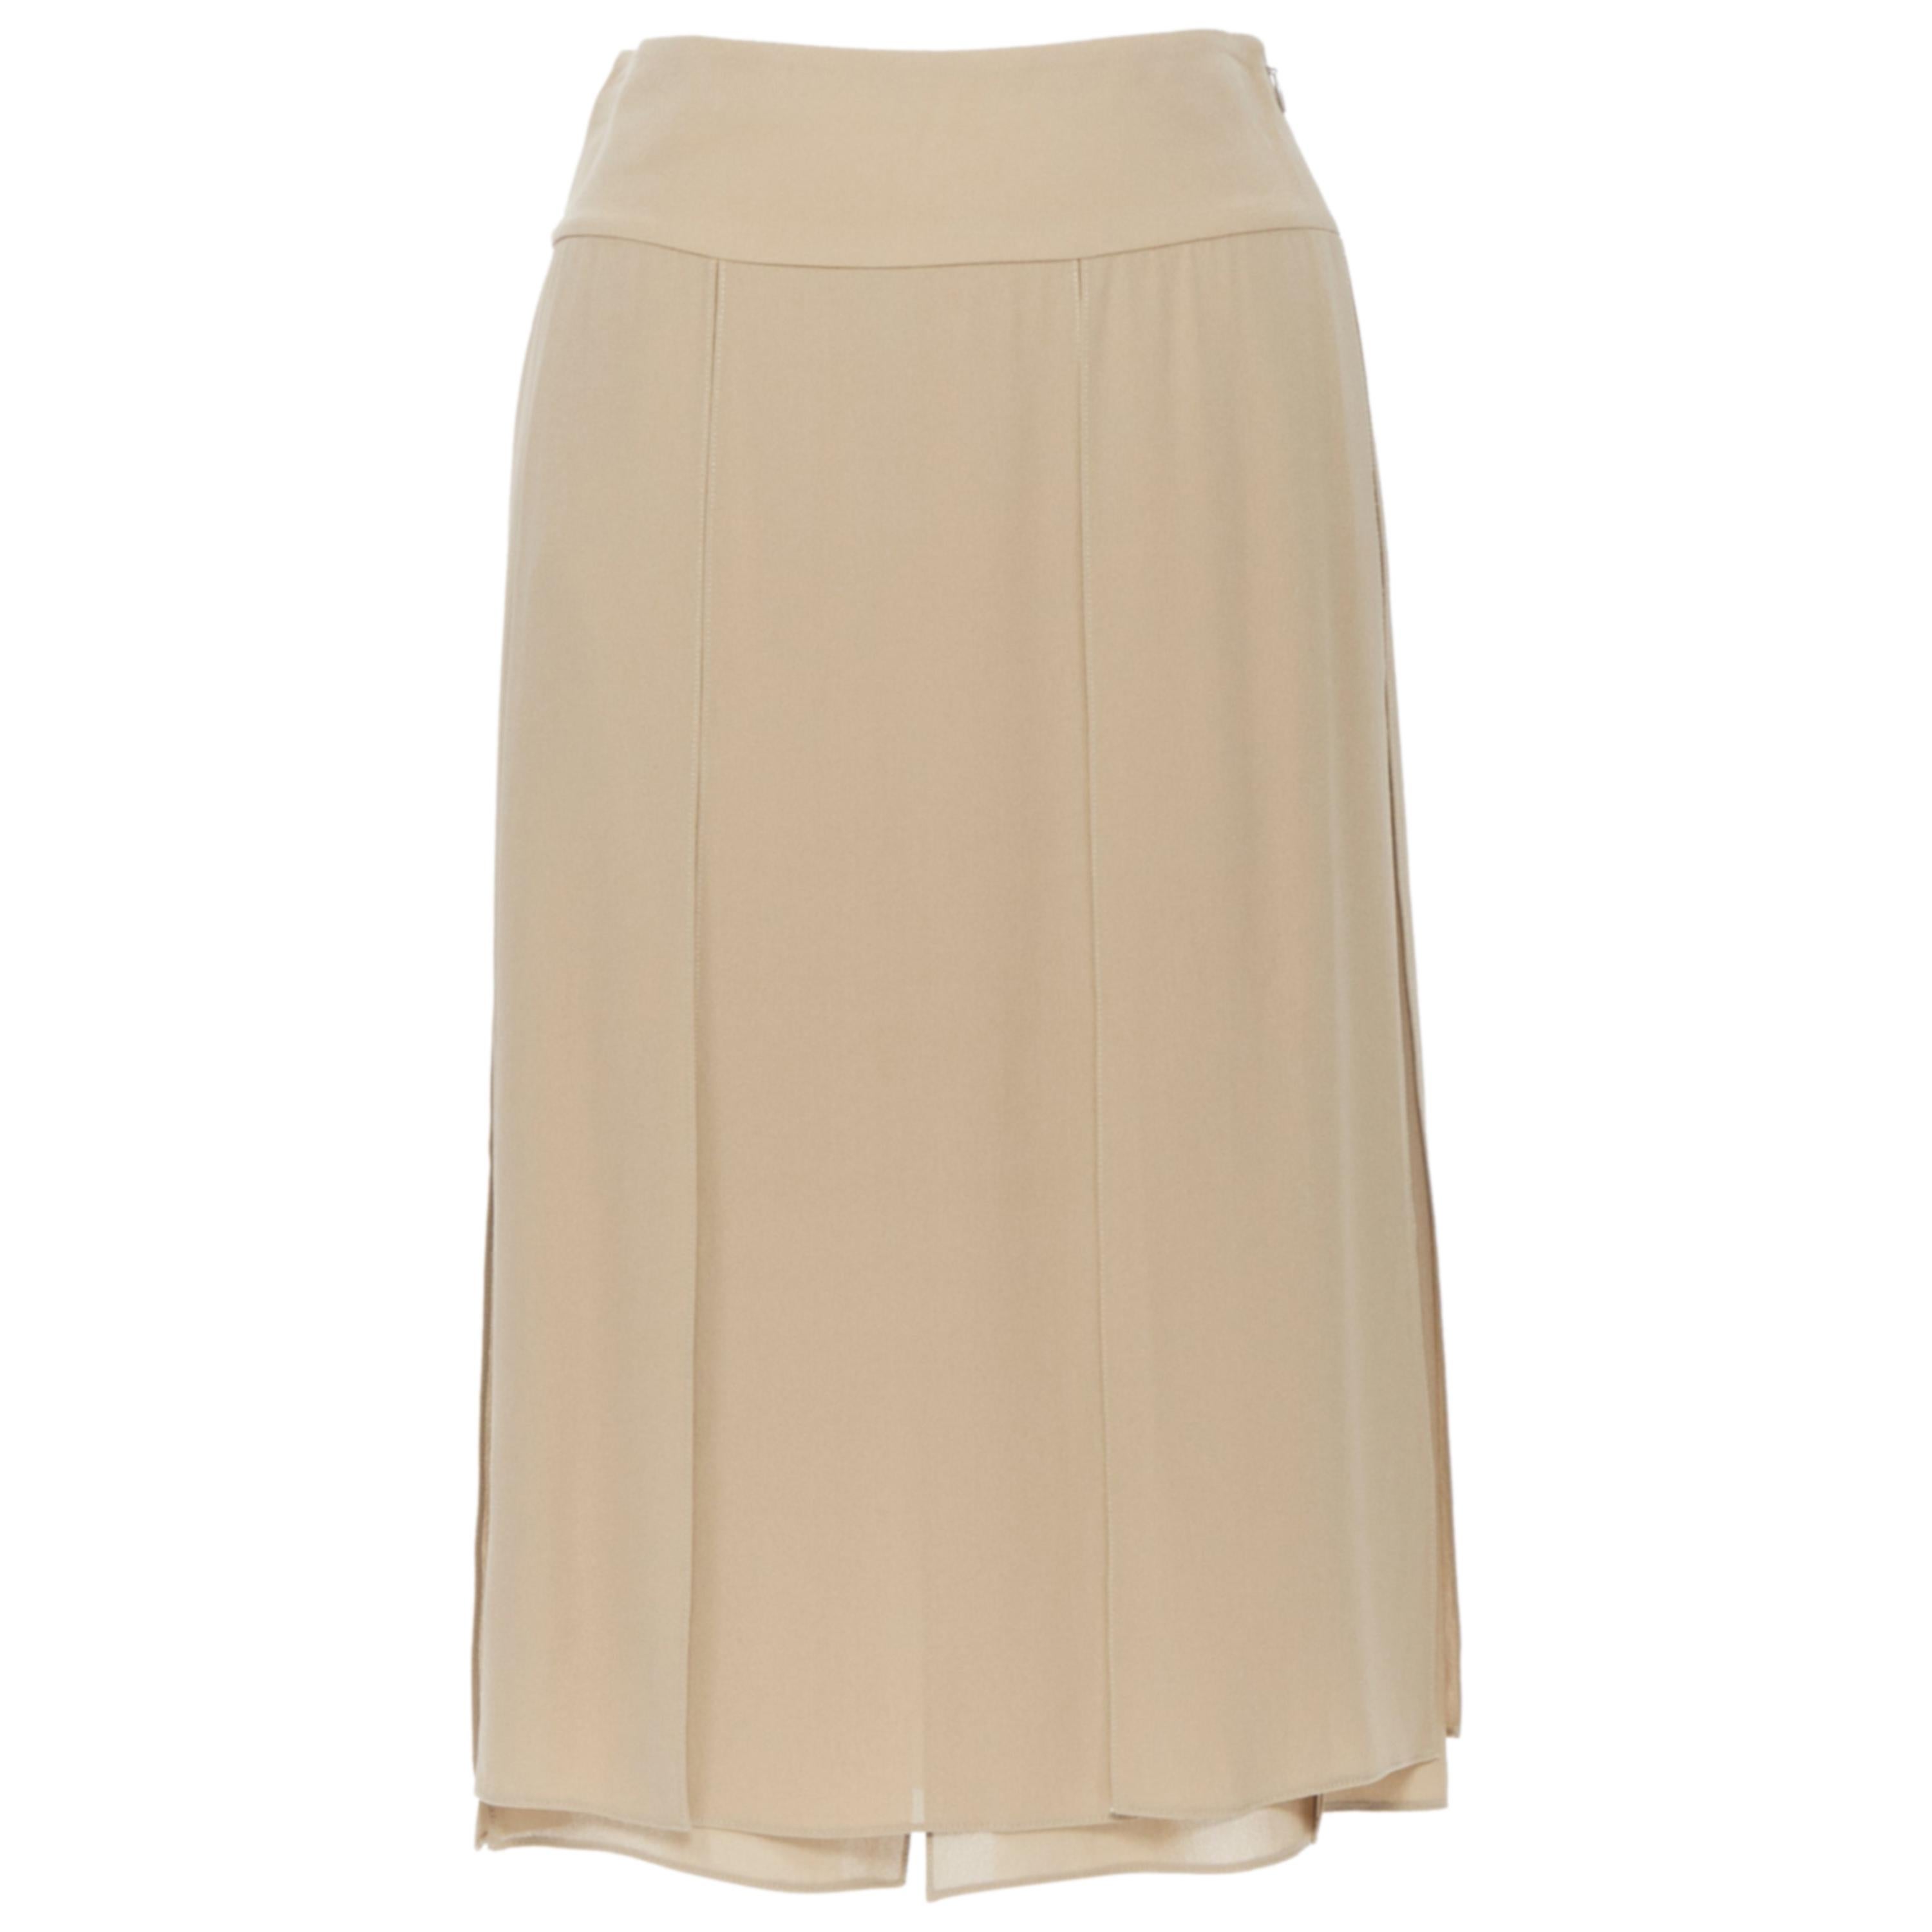 MICHAEL KORS COLLECTION 100% silk camel beige pleated layered skirt US0 24"